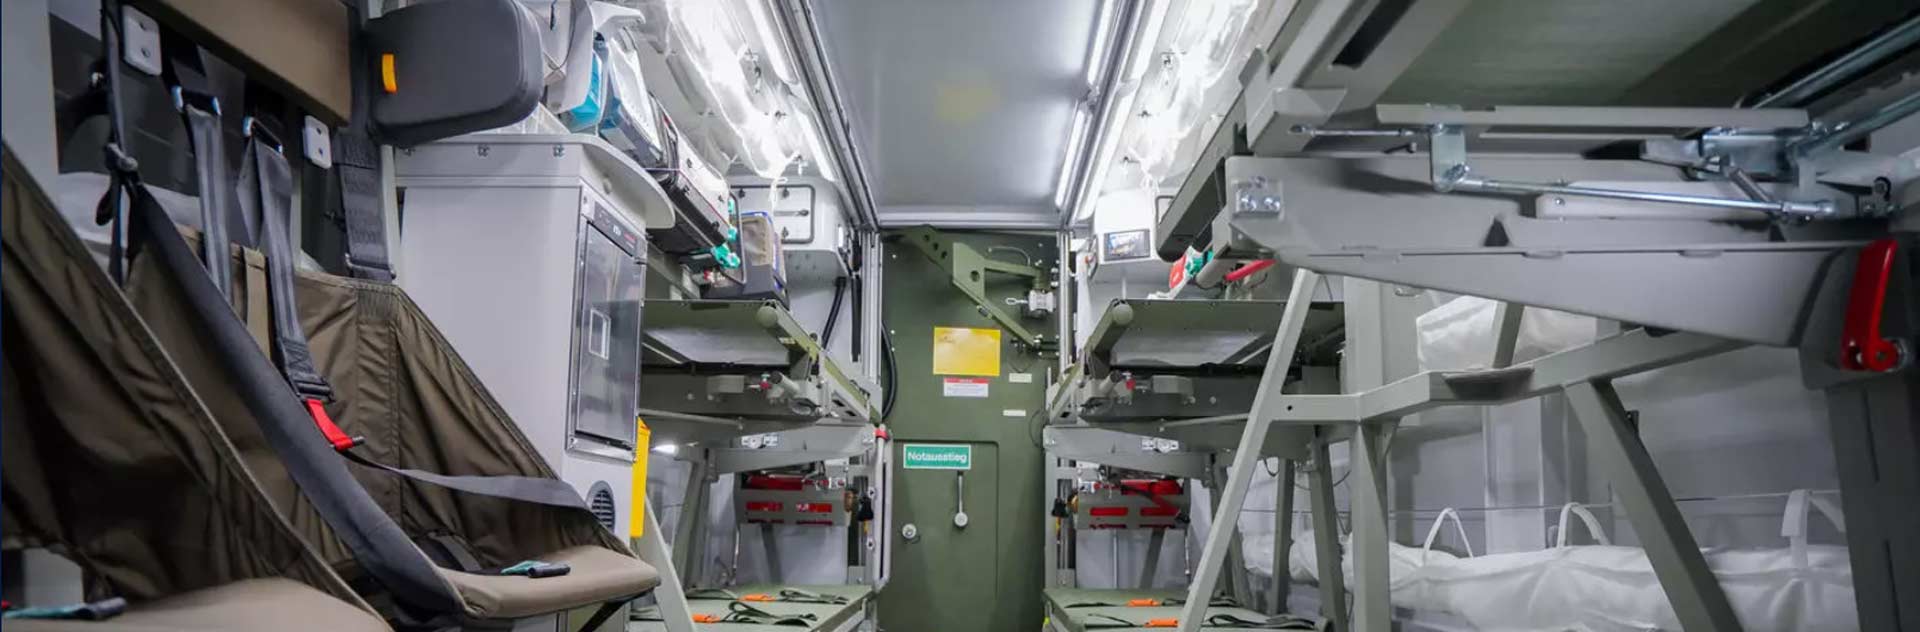 Airbus Defence and Space - Protected-wounded transport containers (GVTC)